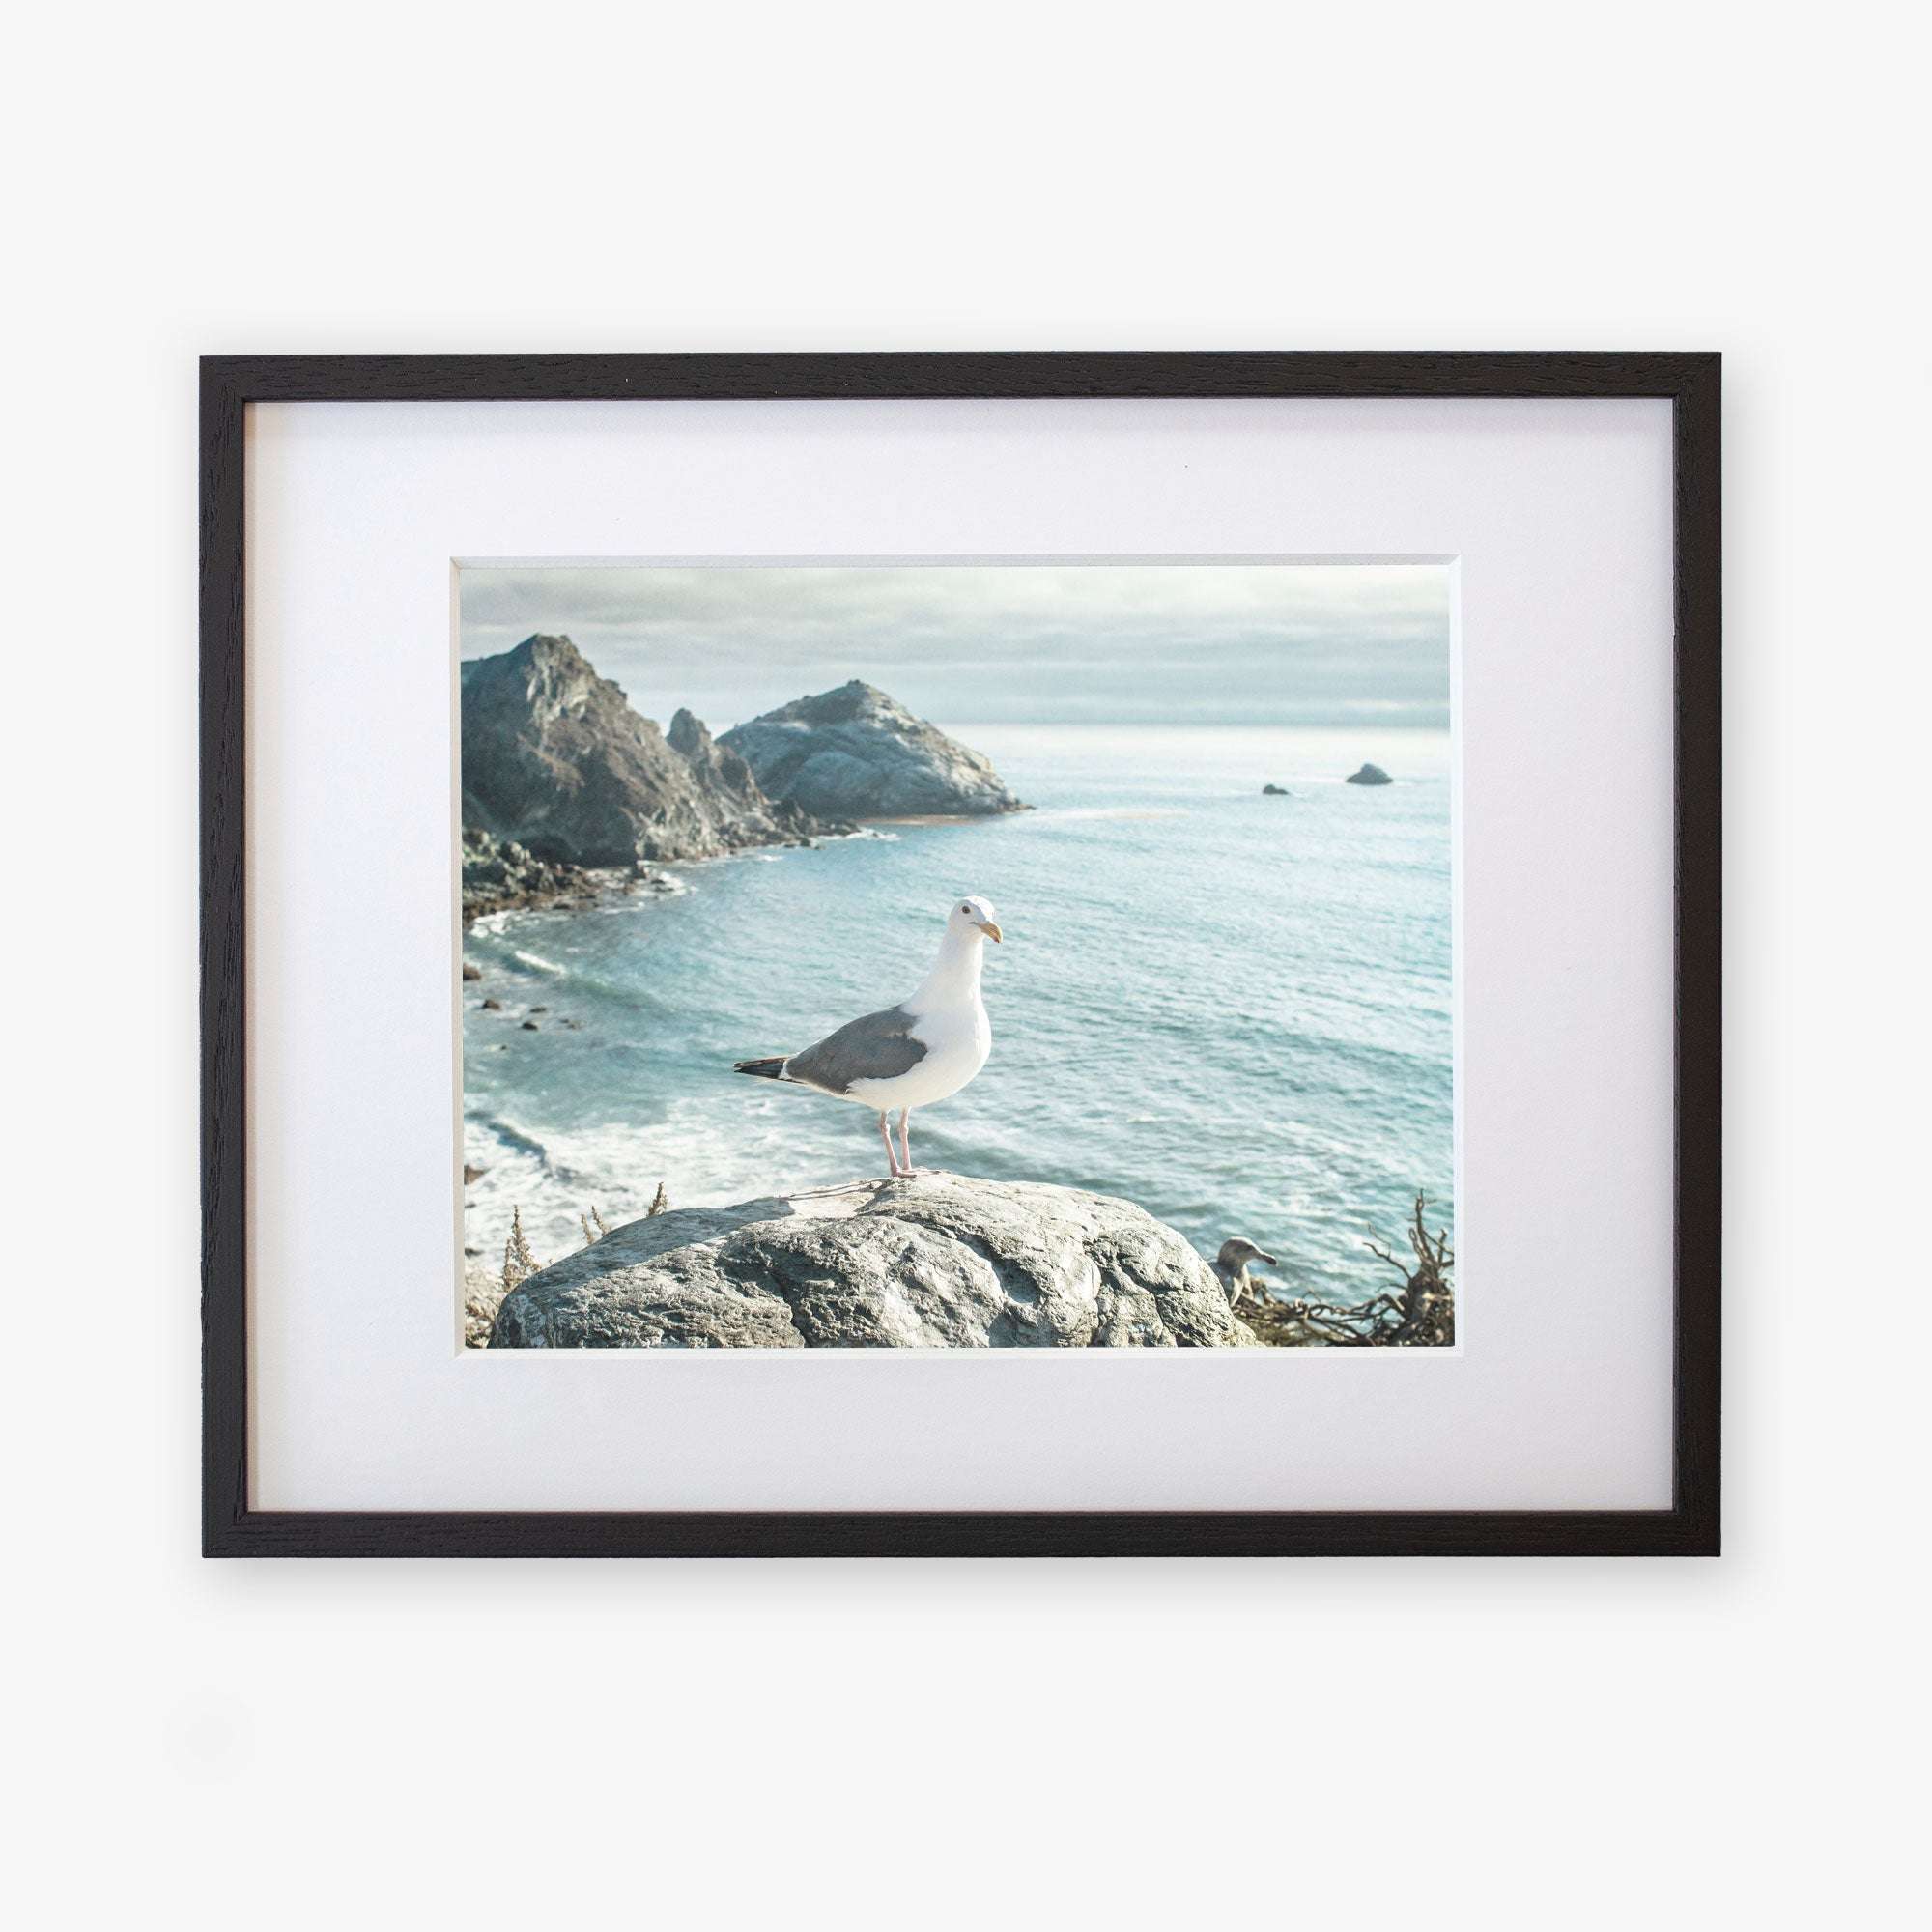 A framed photograph of a Big Sur Landscape Print, &#39;Lobster Mornay For Tea&#39; by Offley Green, printed on archival photographic paper, displayed against a white background.